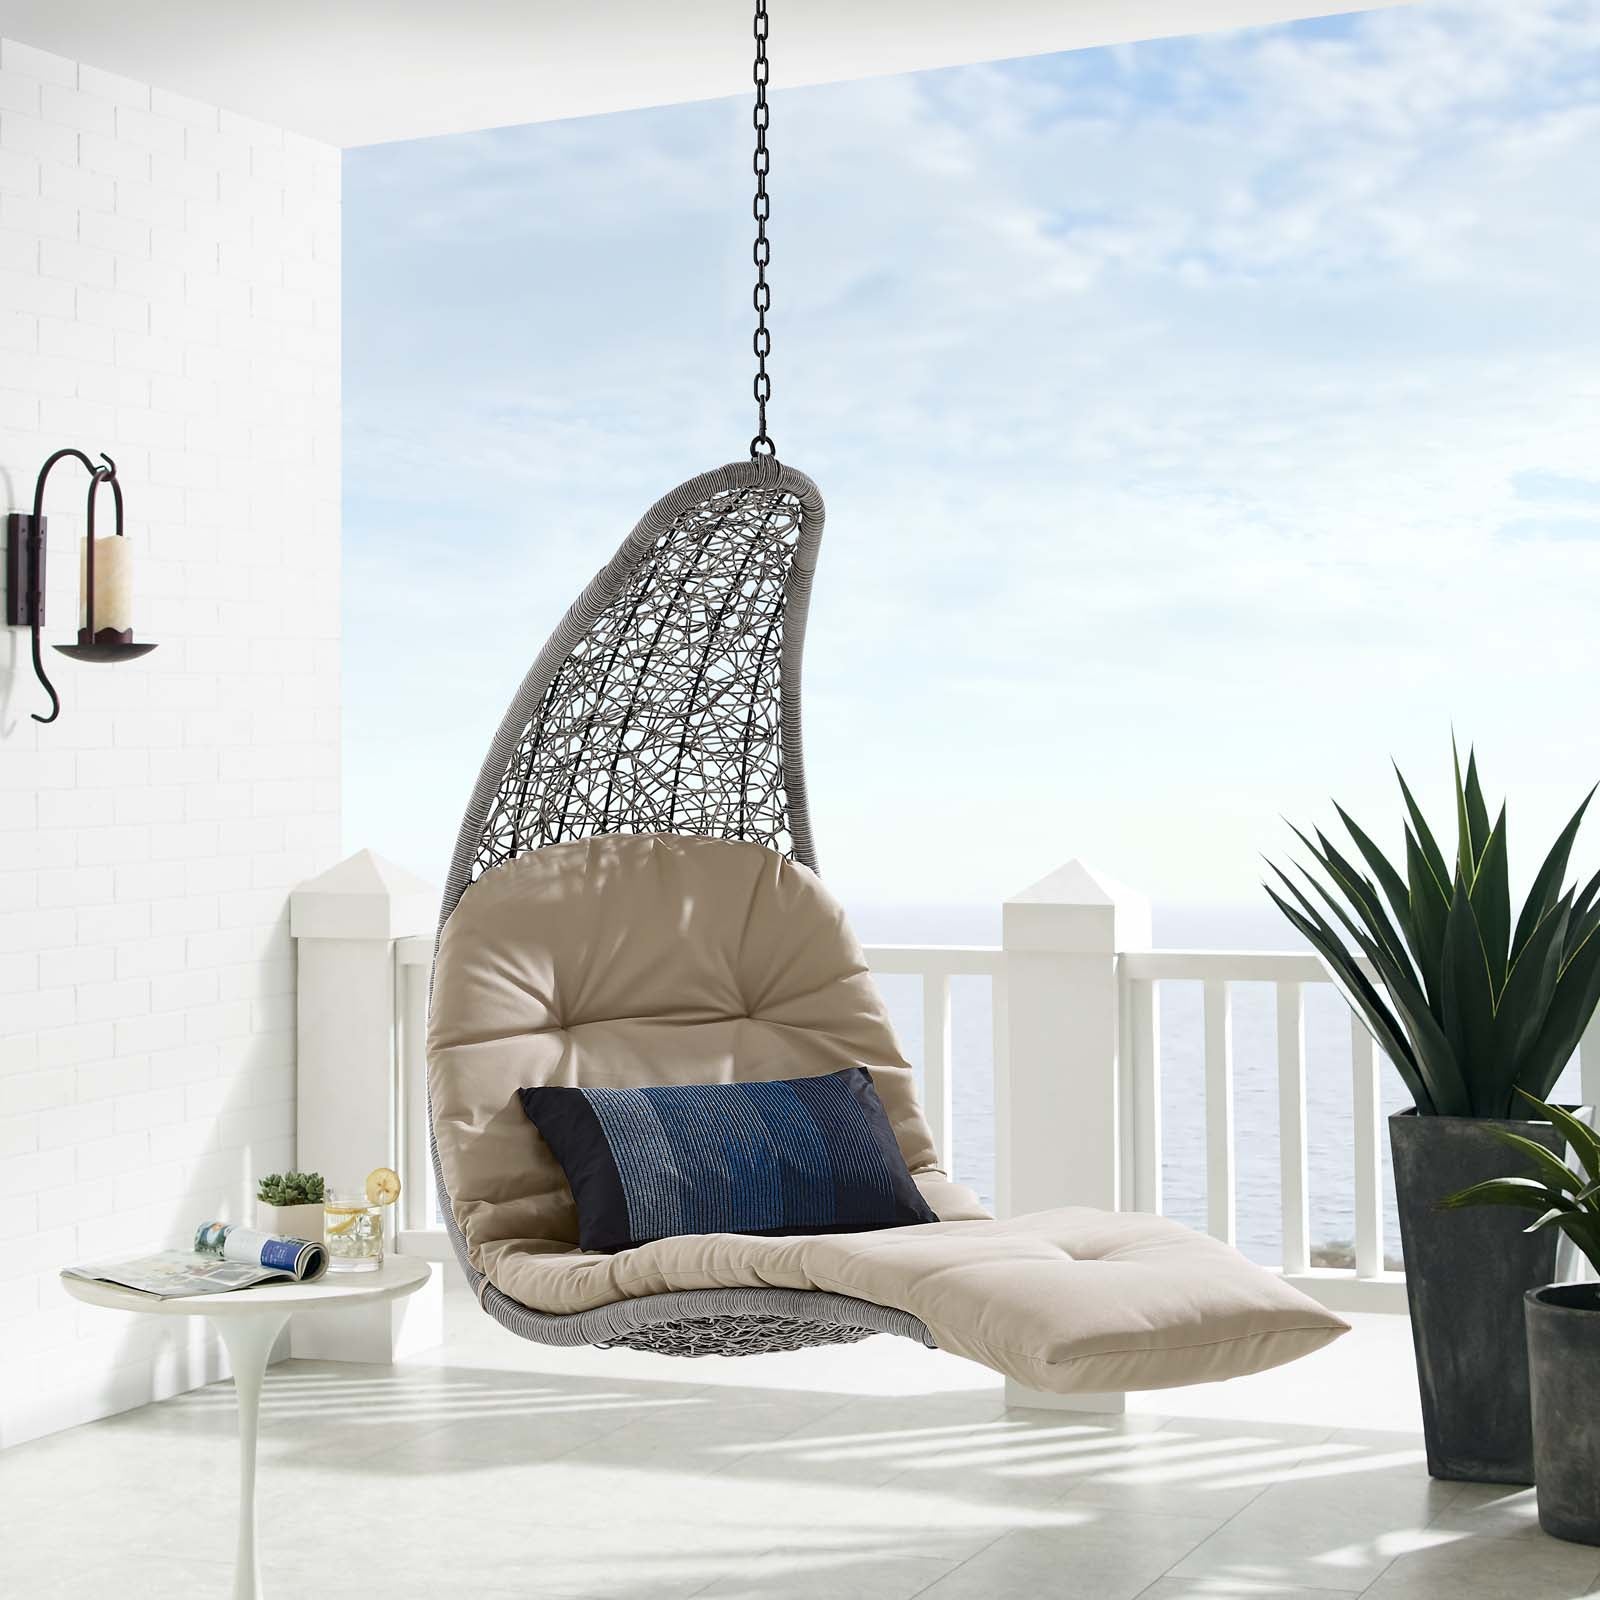 Landscape Patio Hanging Chaise Lounge Swing Chair